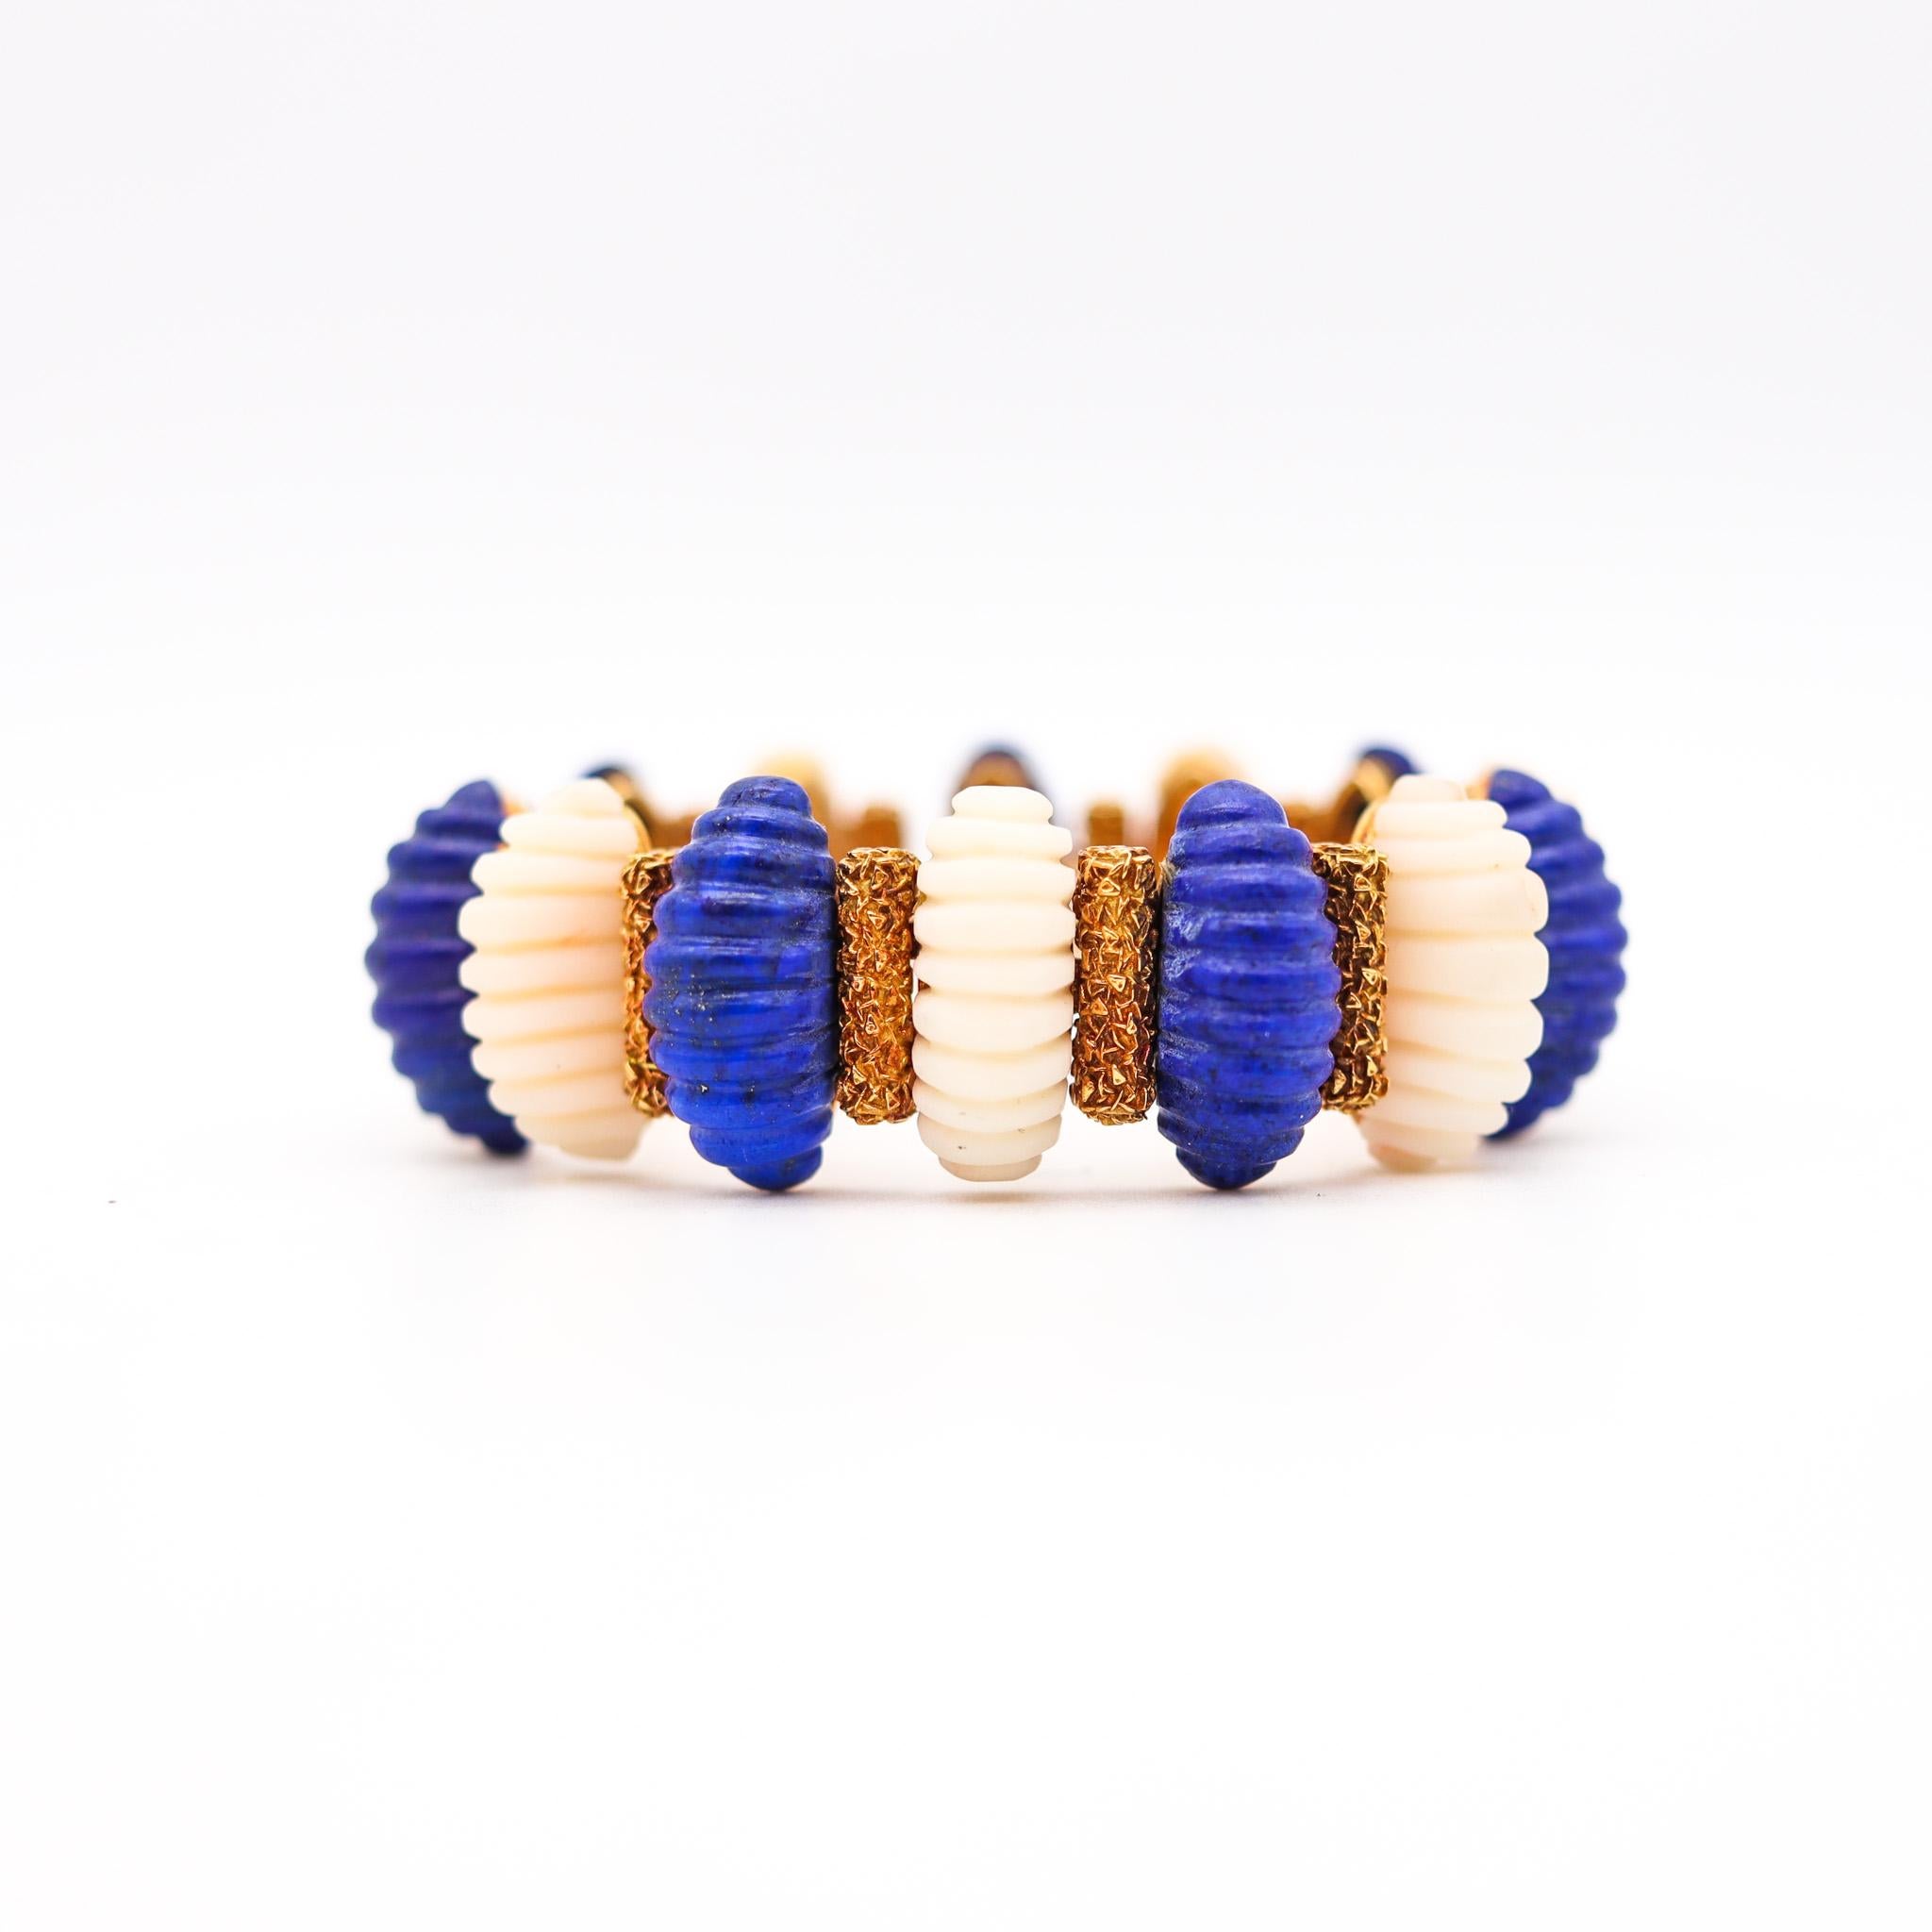 French modernist bracelet designed by W. et F. WEISS Et FILS.

Fabulous retro modernist bracelet, created in France during the mid century period, back in the 1960. This bracelet was carefully crafted at the jewelry workshop of W. et F. Weise et